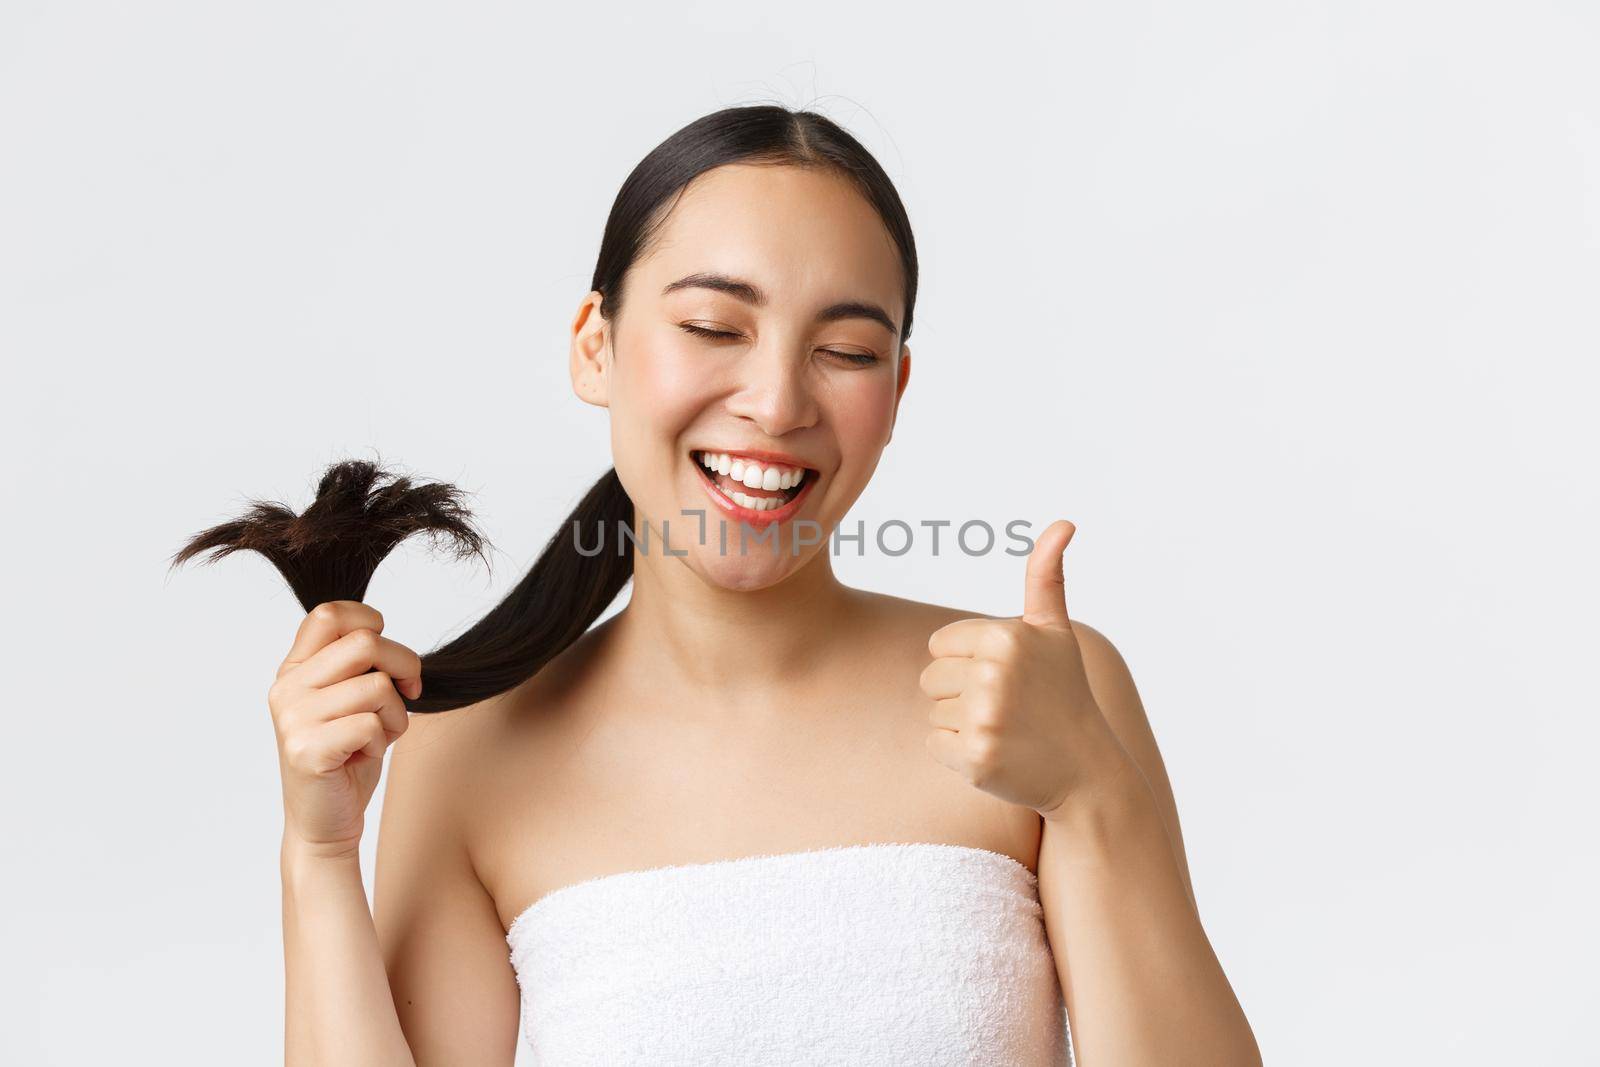 Beauty, hair loss products, shampoo and hair care concept. Close-up of satisfied, happy asian girl in bath towel showing thumbs-up and healthy hair ends, standing pleased white background.